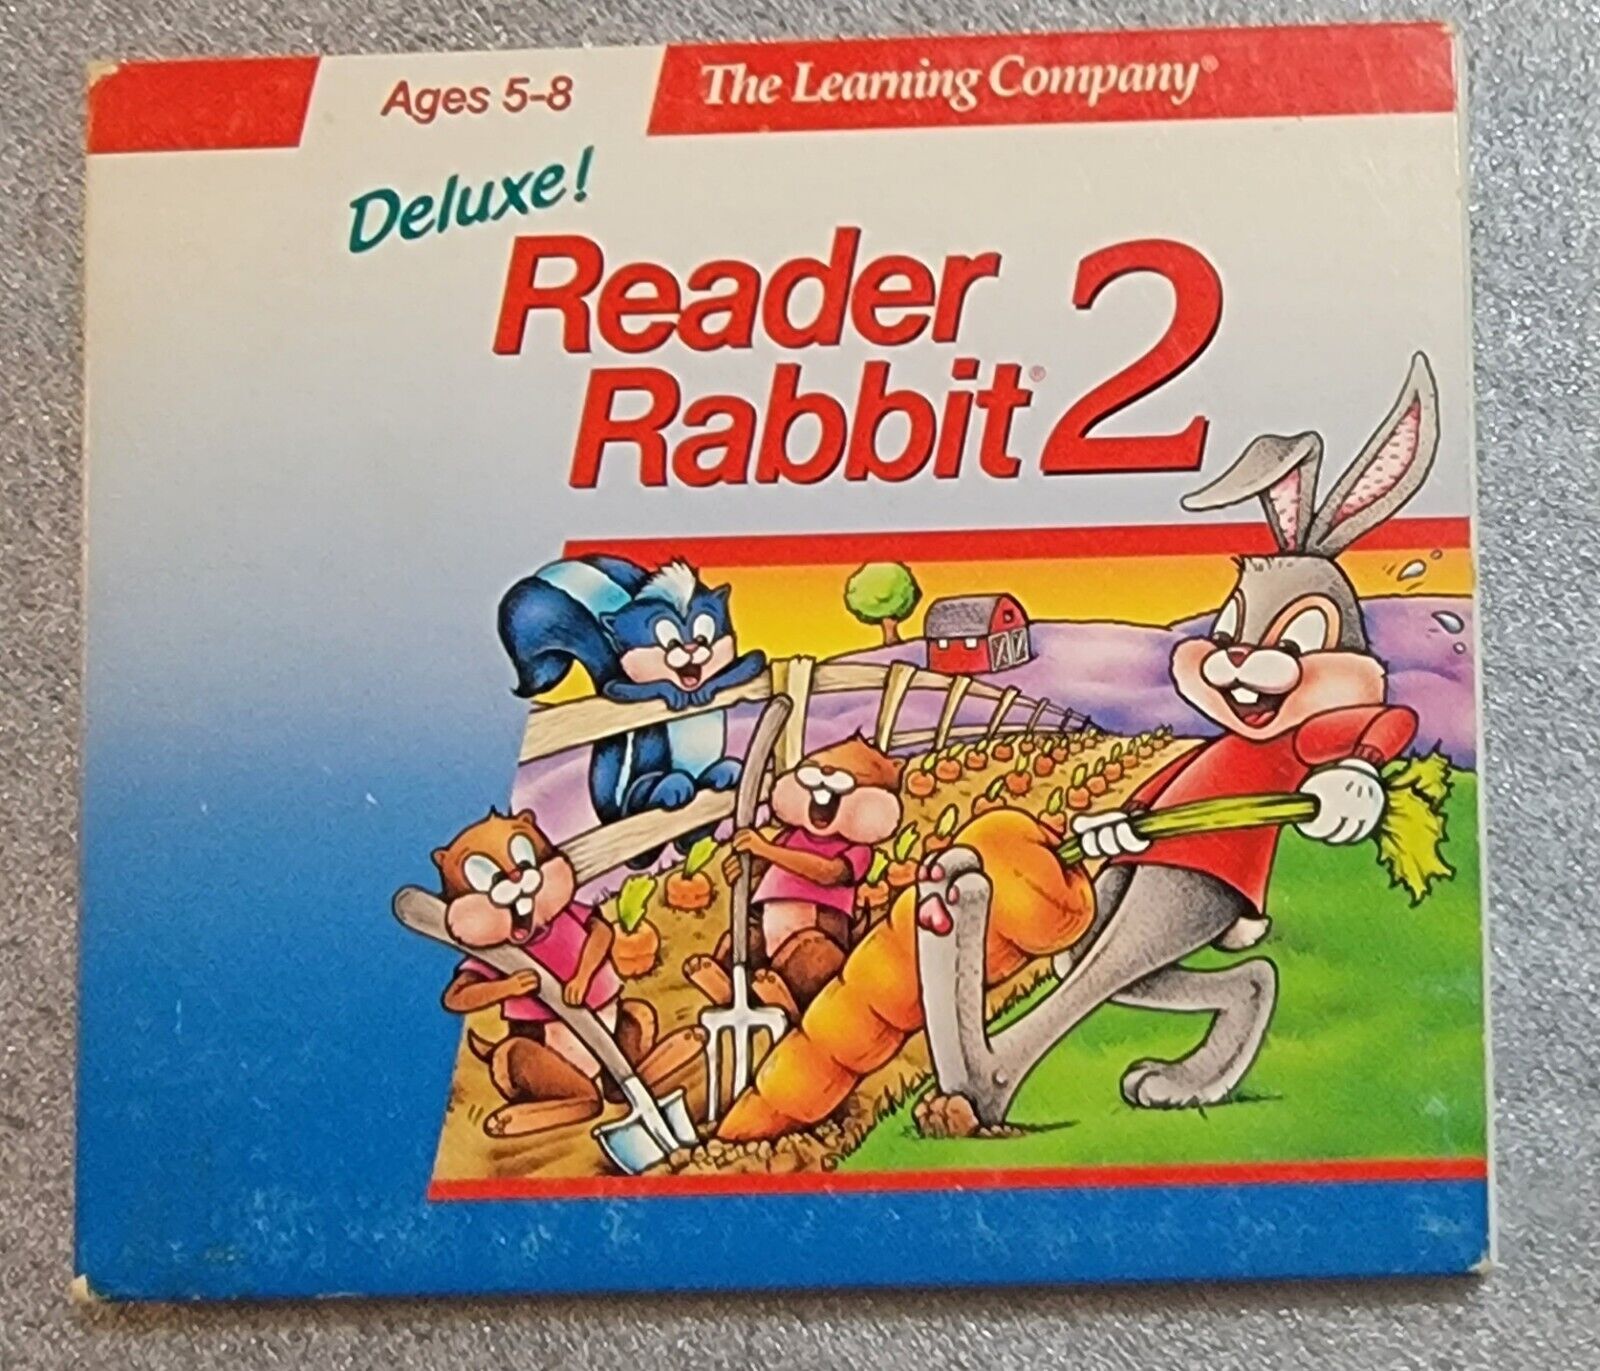 The Learning Company Reader Rabbit 2 Deluxe Vintage PC Learning Reading Game